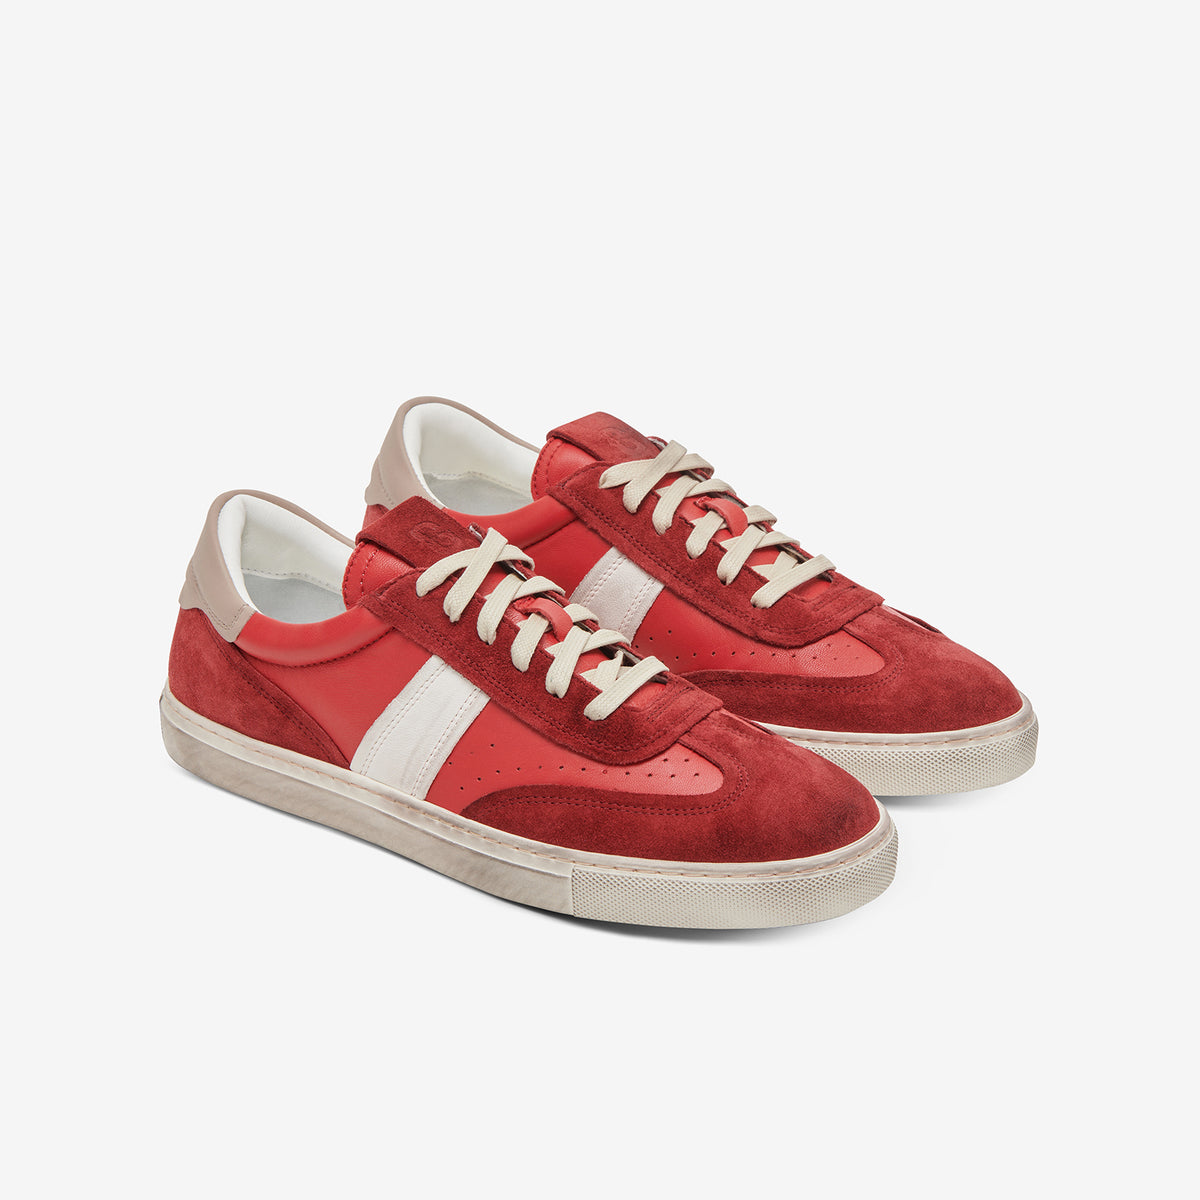 Greats - The Charlie Distressed - Red - Men's Shoe – GREATS